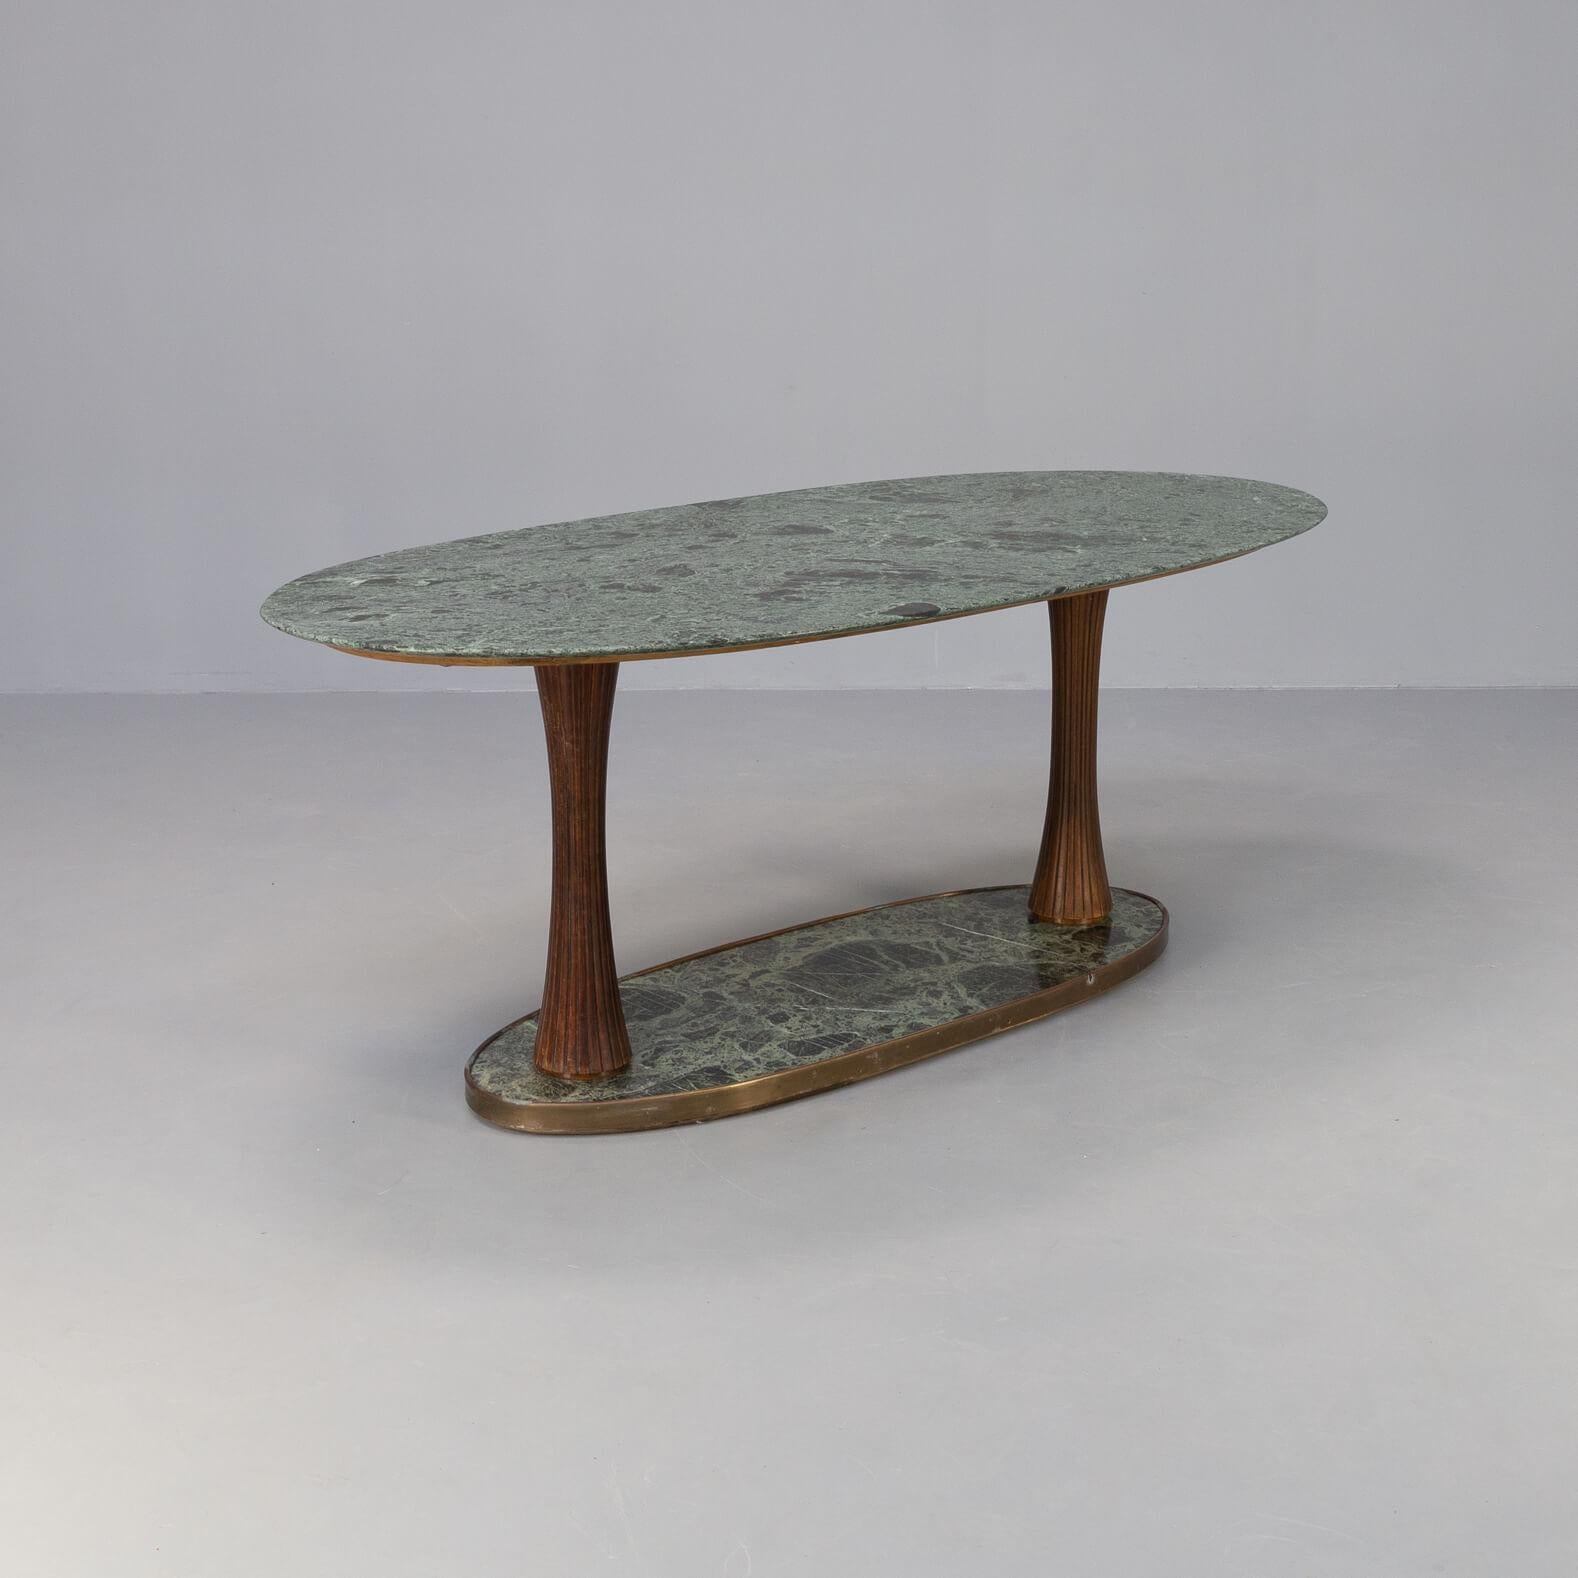 The furniture of Vittorio Dassi (1893-1973), made in the ’40s and ’50s, stands out for the choice of fine woods such as, cherry wood, ash and walnut, often decorated with inlaid panels and crystal signed by prominent master glassworkers. Vittorio